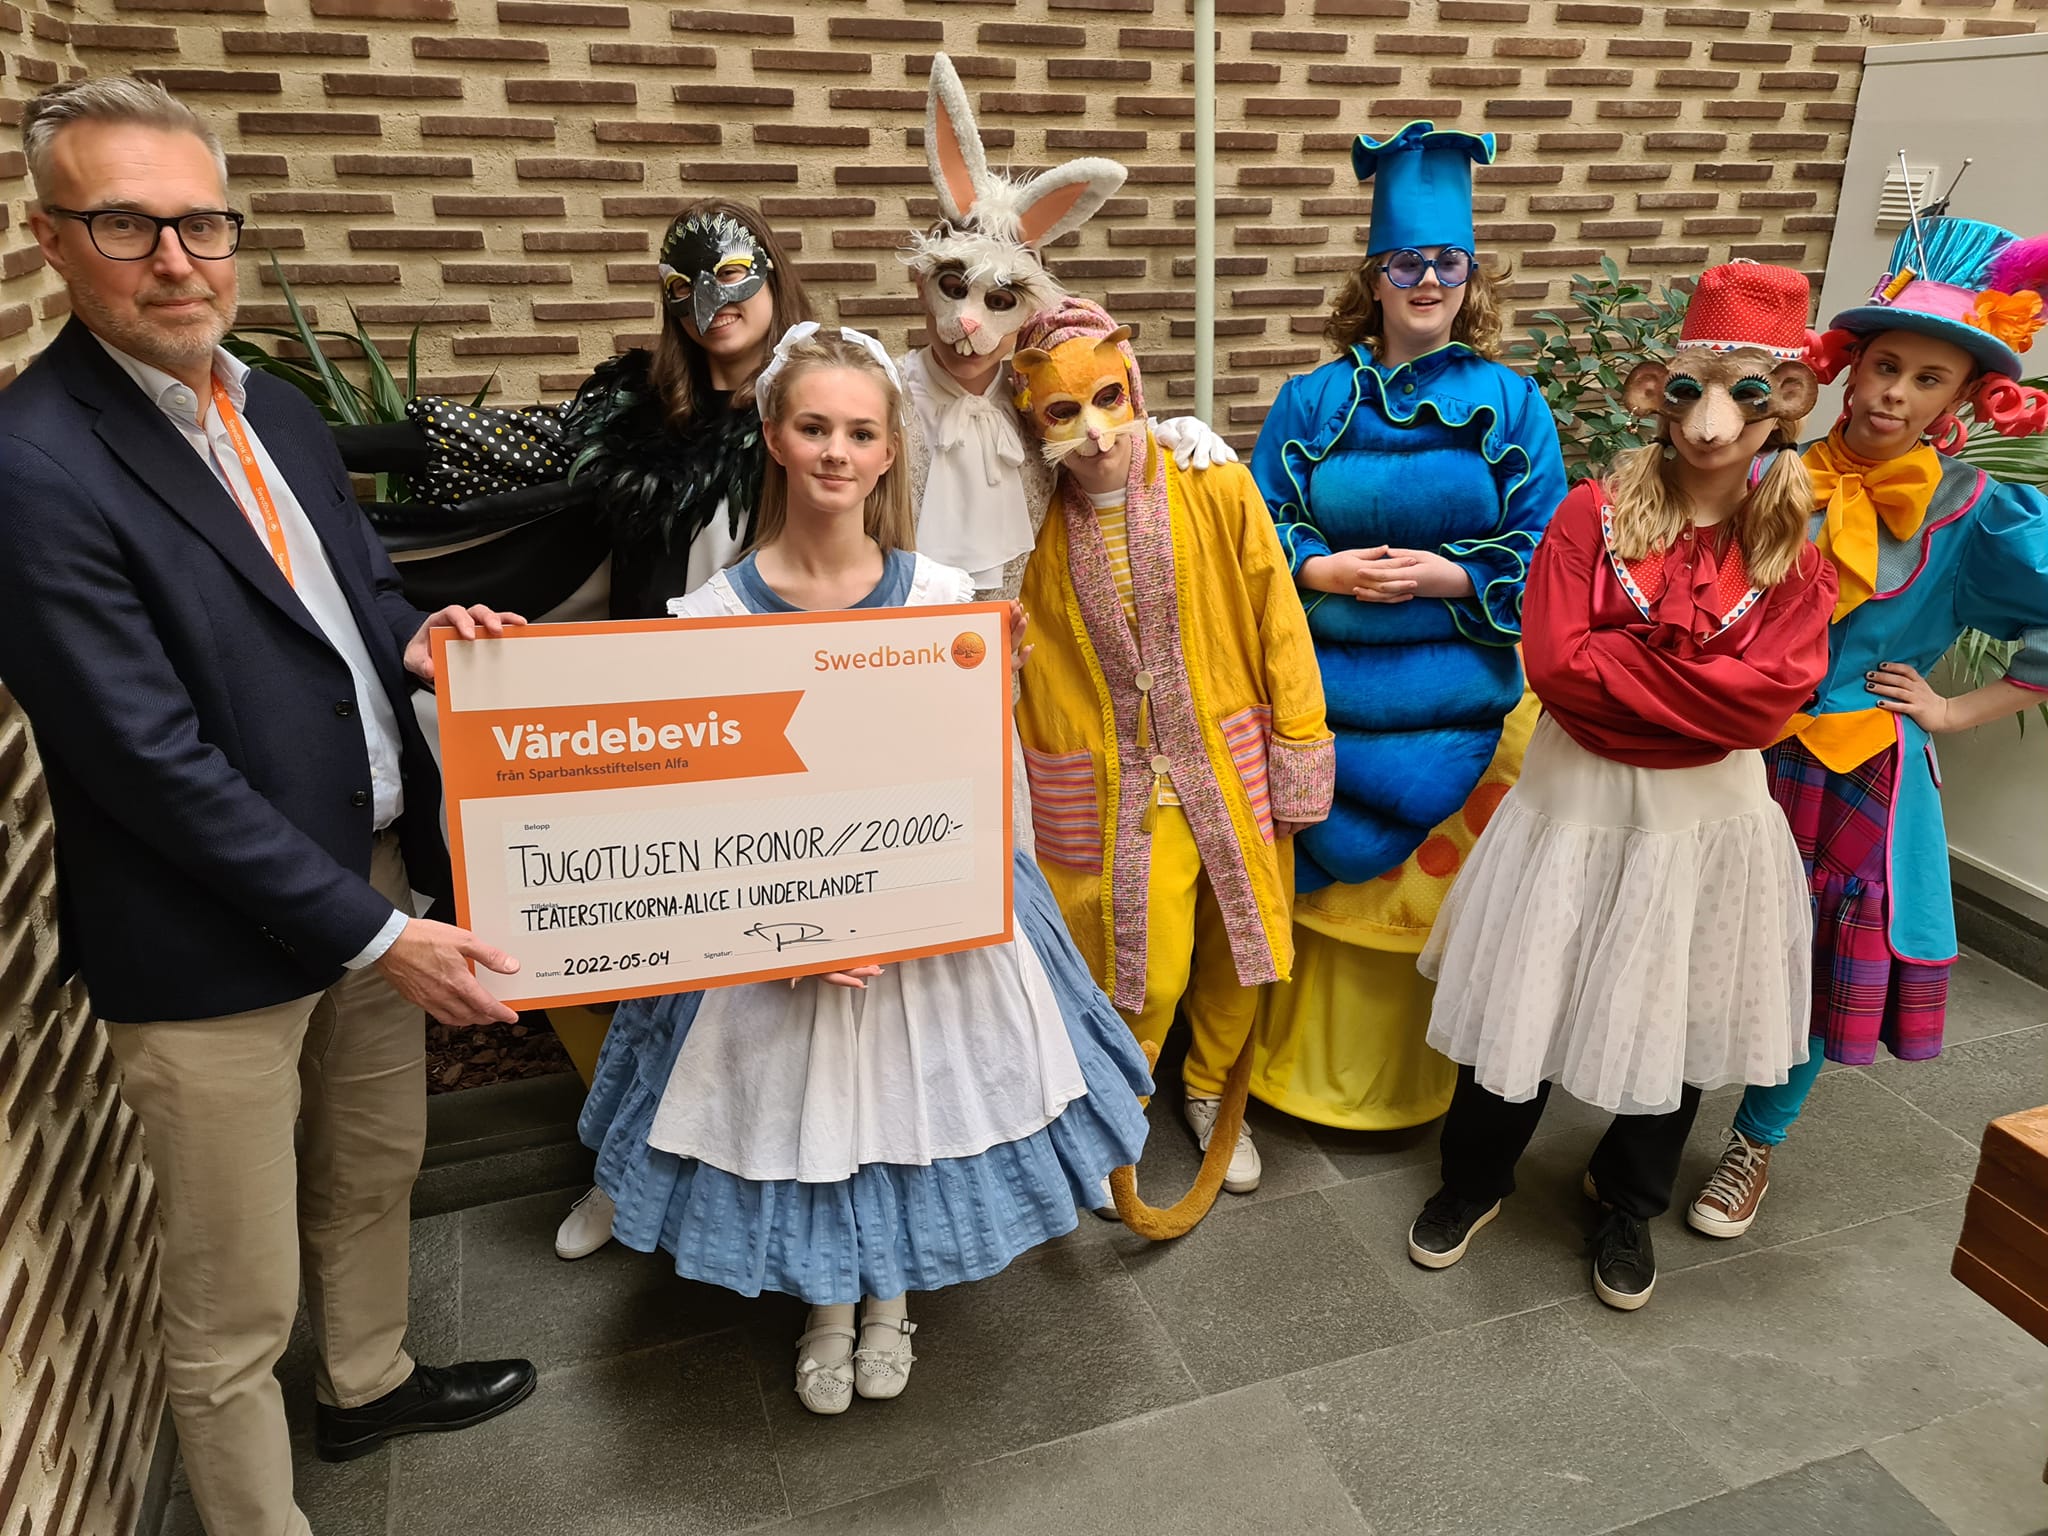 Children's theater group receives vouchers from Swedbank